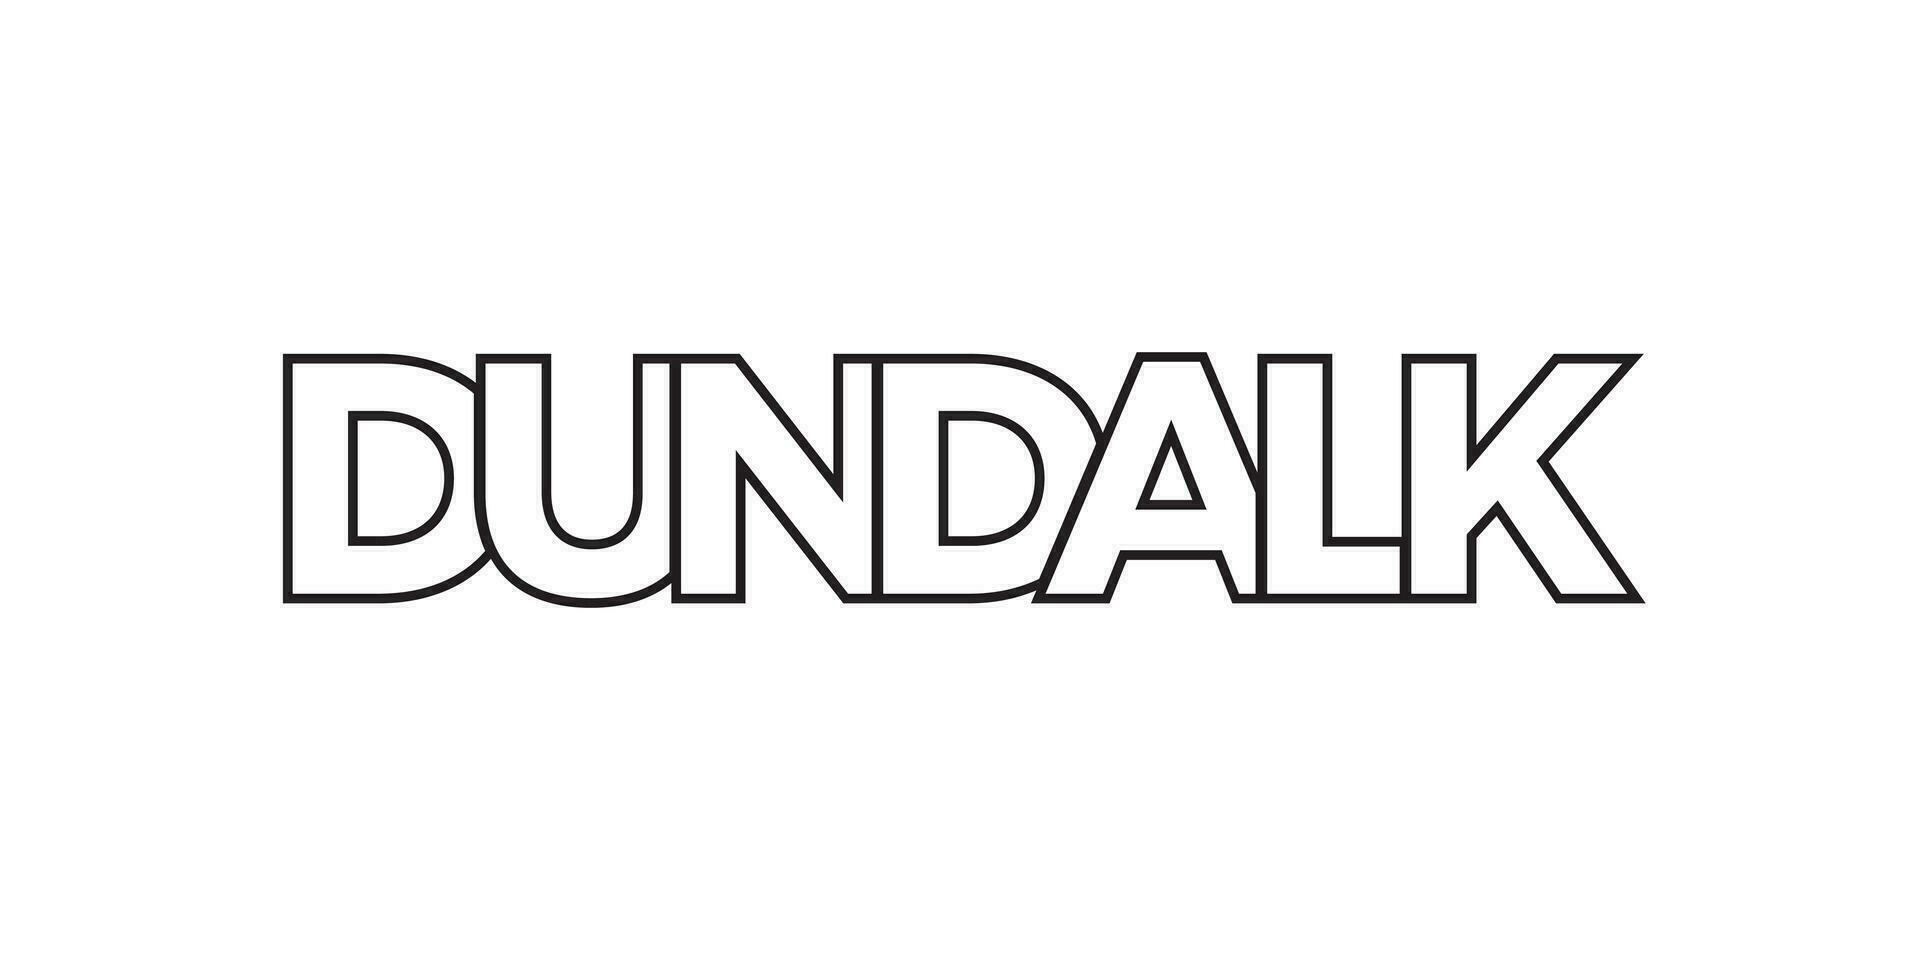 Dundalk in the Ireland emblem. The design features a geometric style, vector illustration with bold typography in a modern font. The graphic slogan lettering.